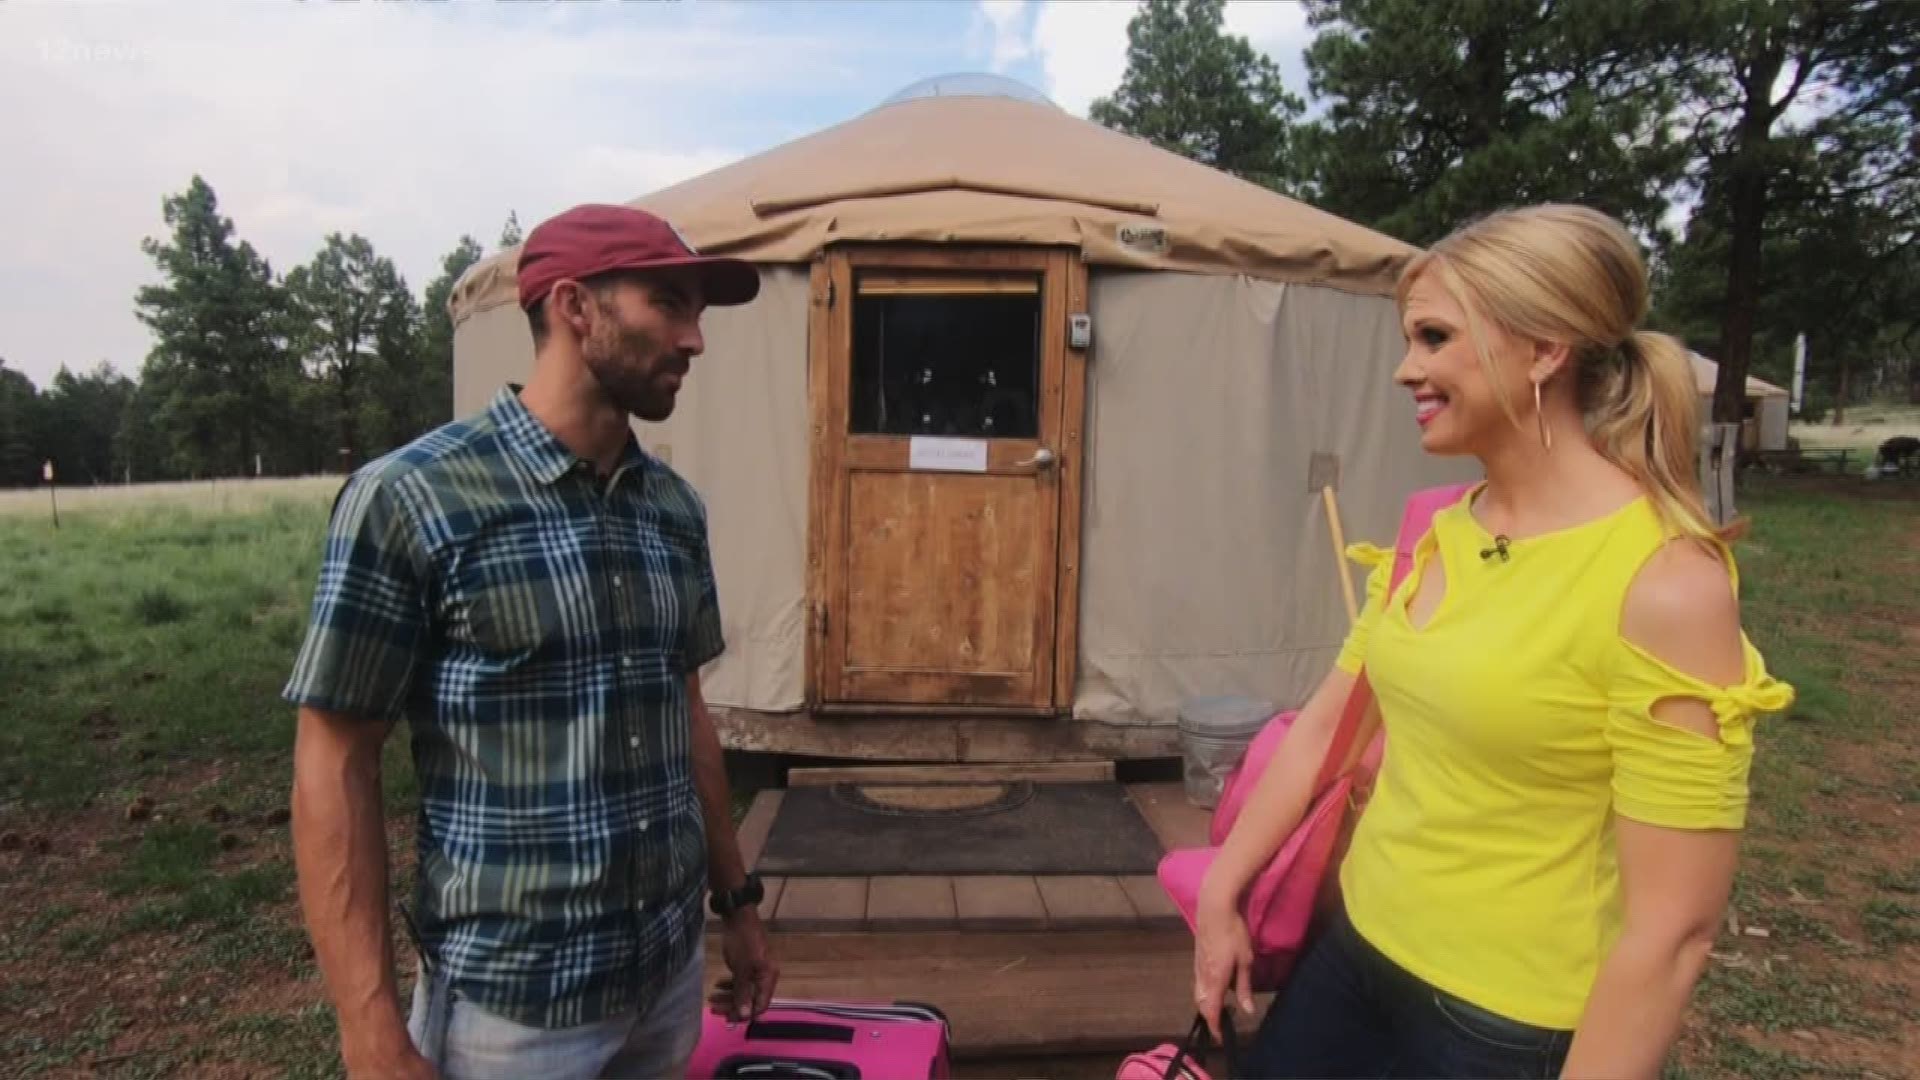 Learn how to pitch a tent or stay at he Arizona Nordic Village